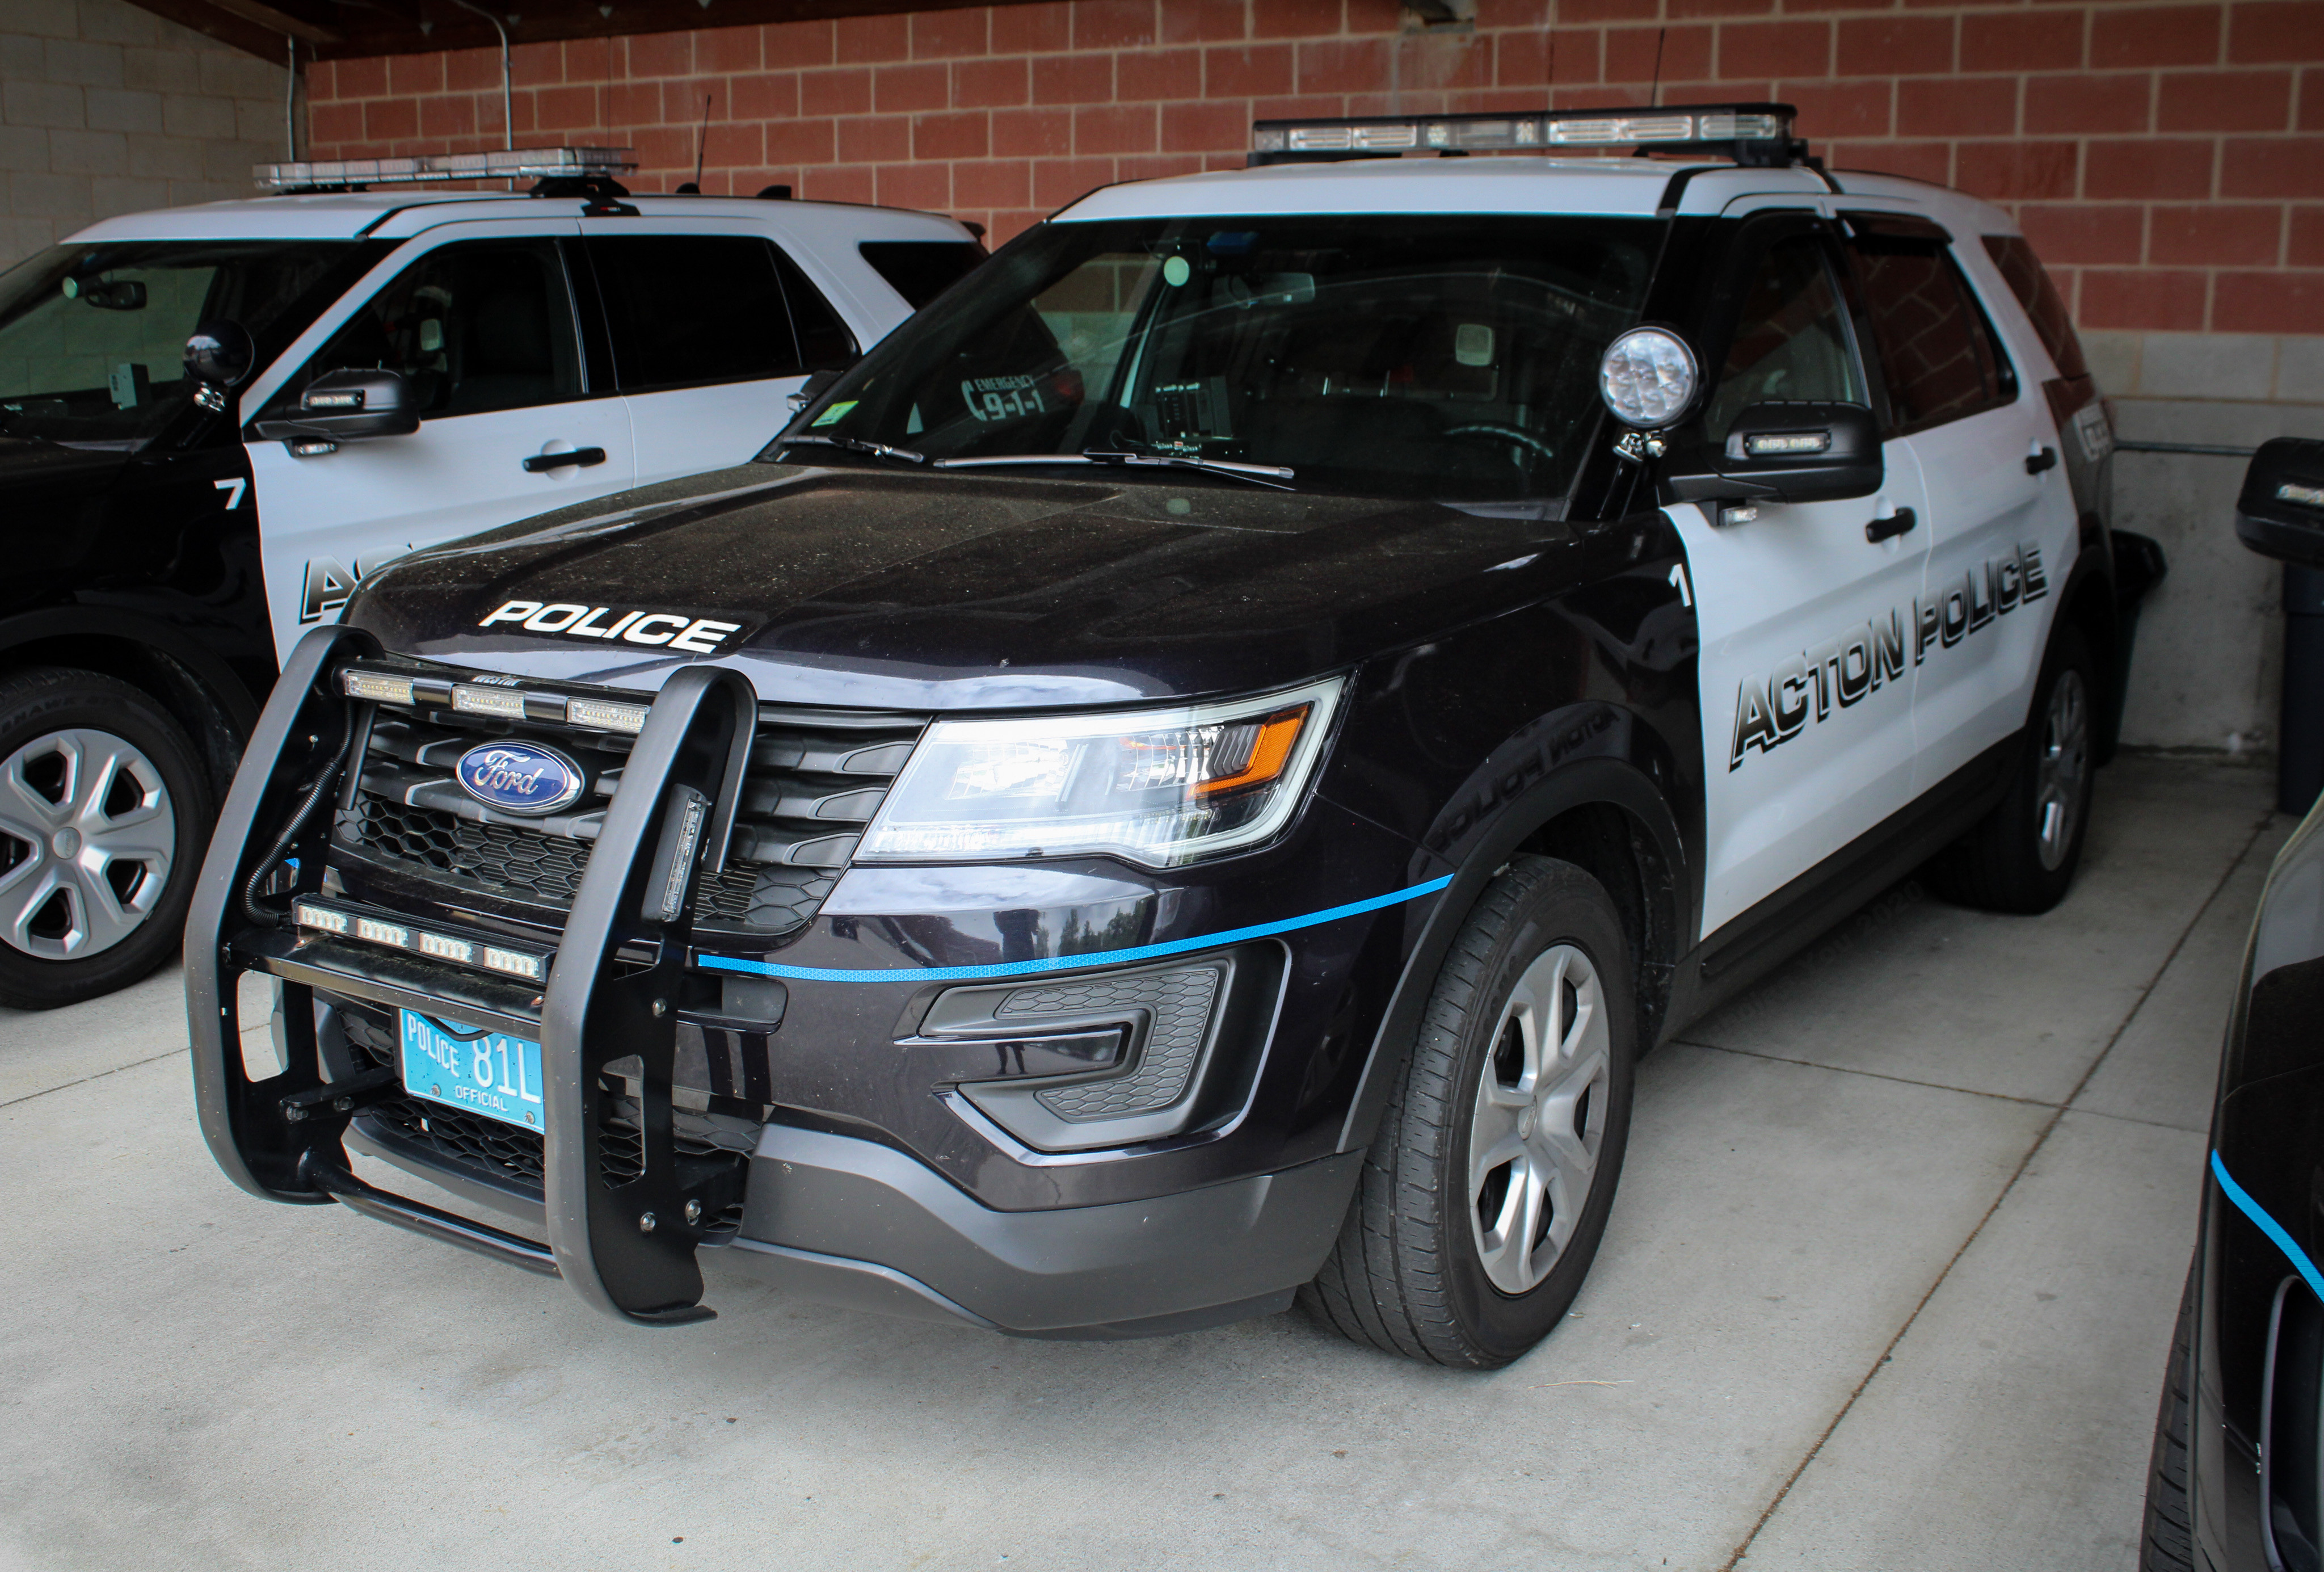 A photo  of Acton Police
            Car 1, a 2016-2019 Ford Police Interceptor Utility             taken by Nicholas You